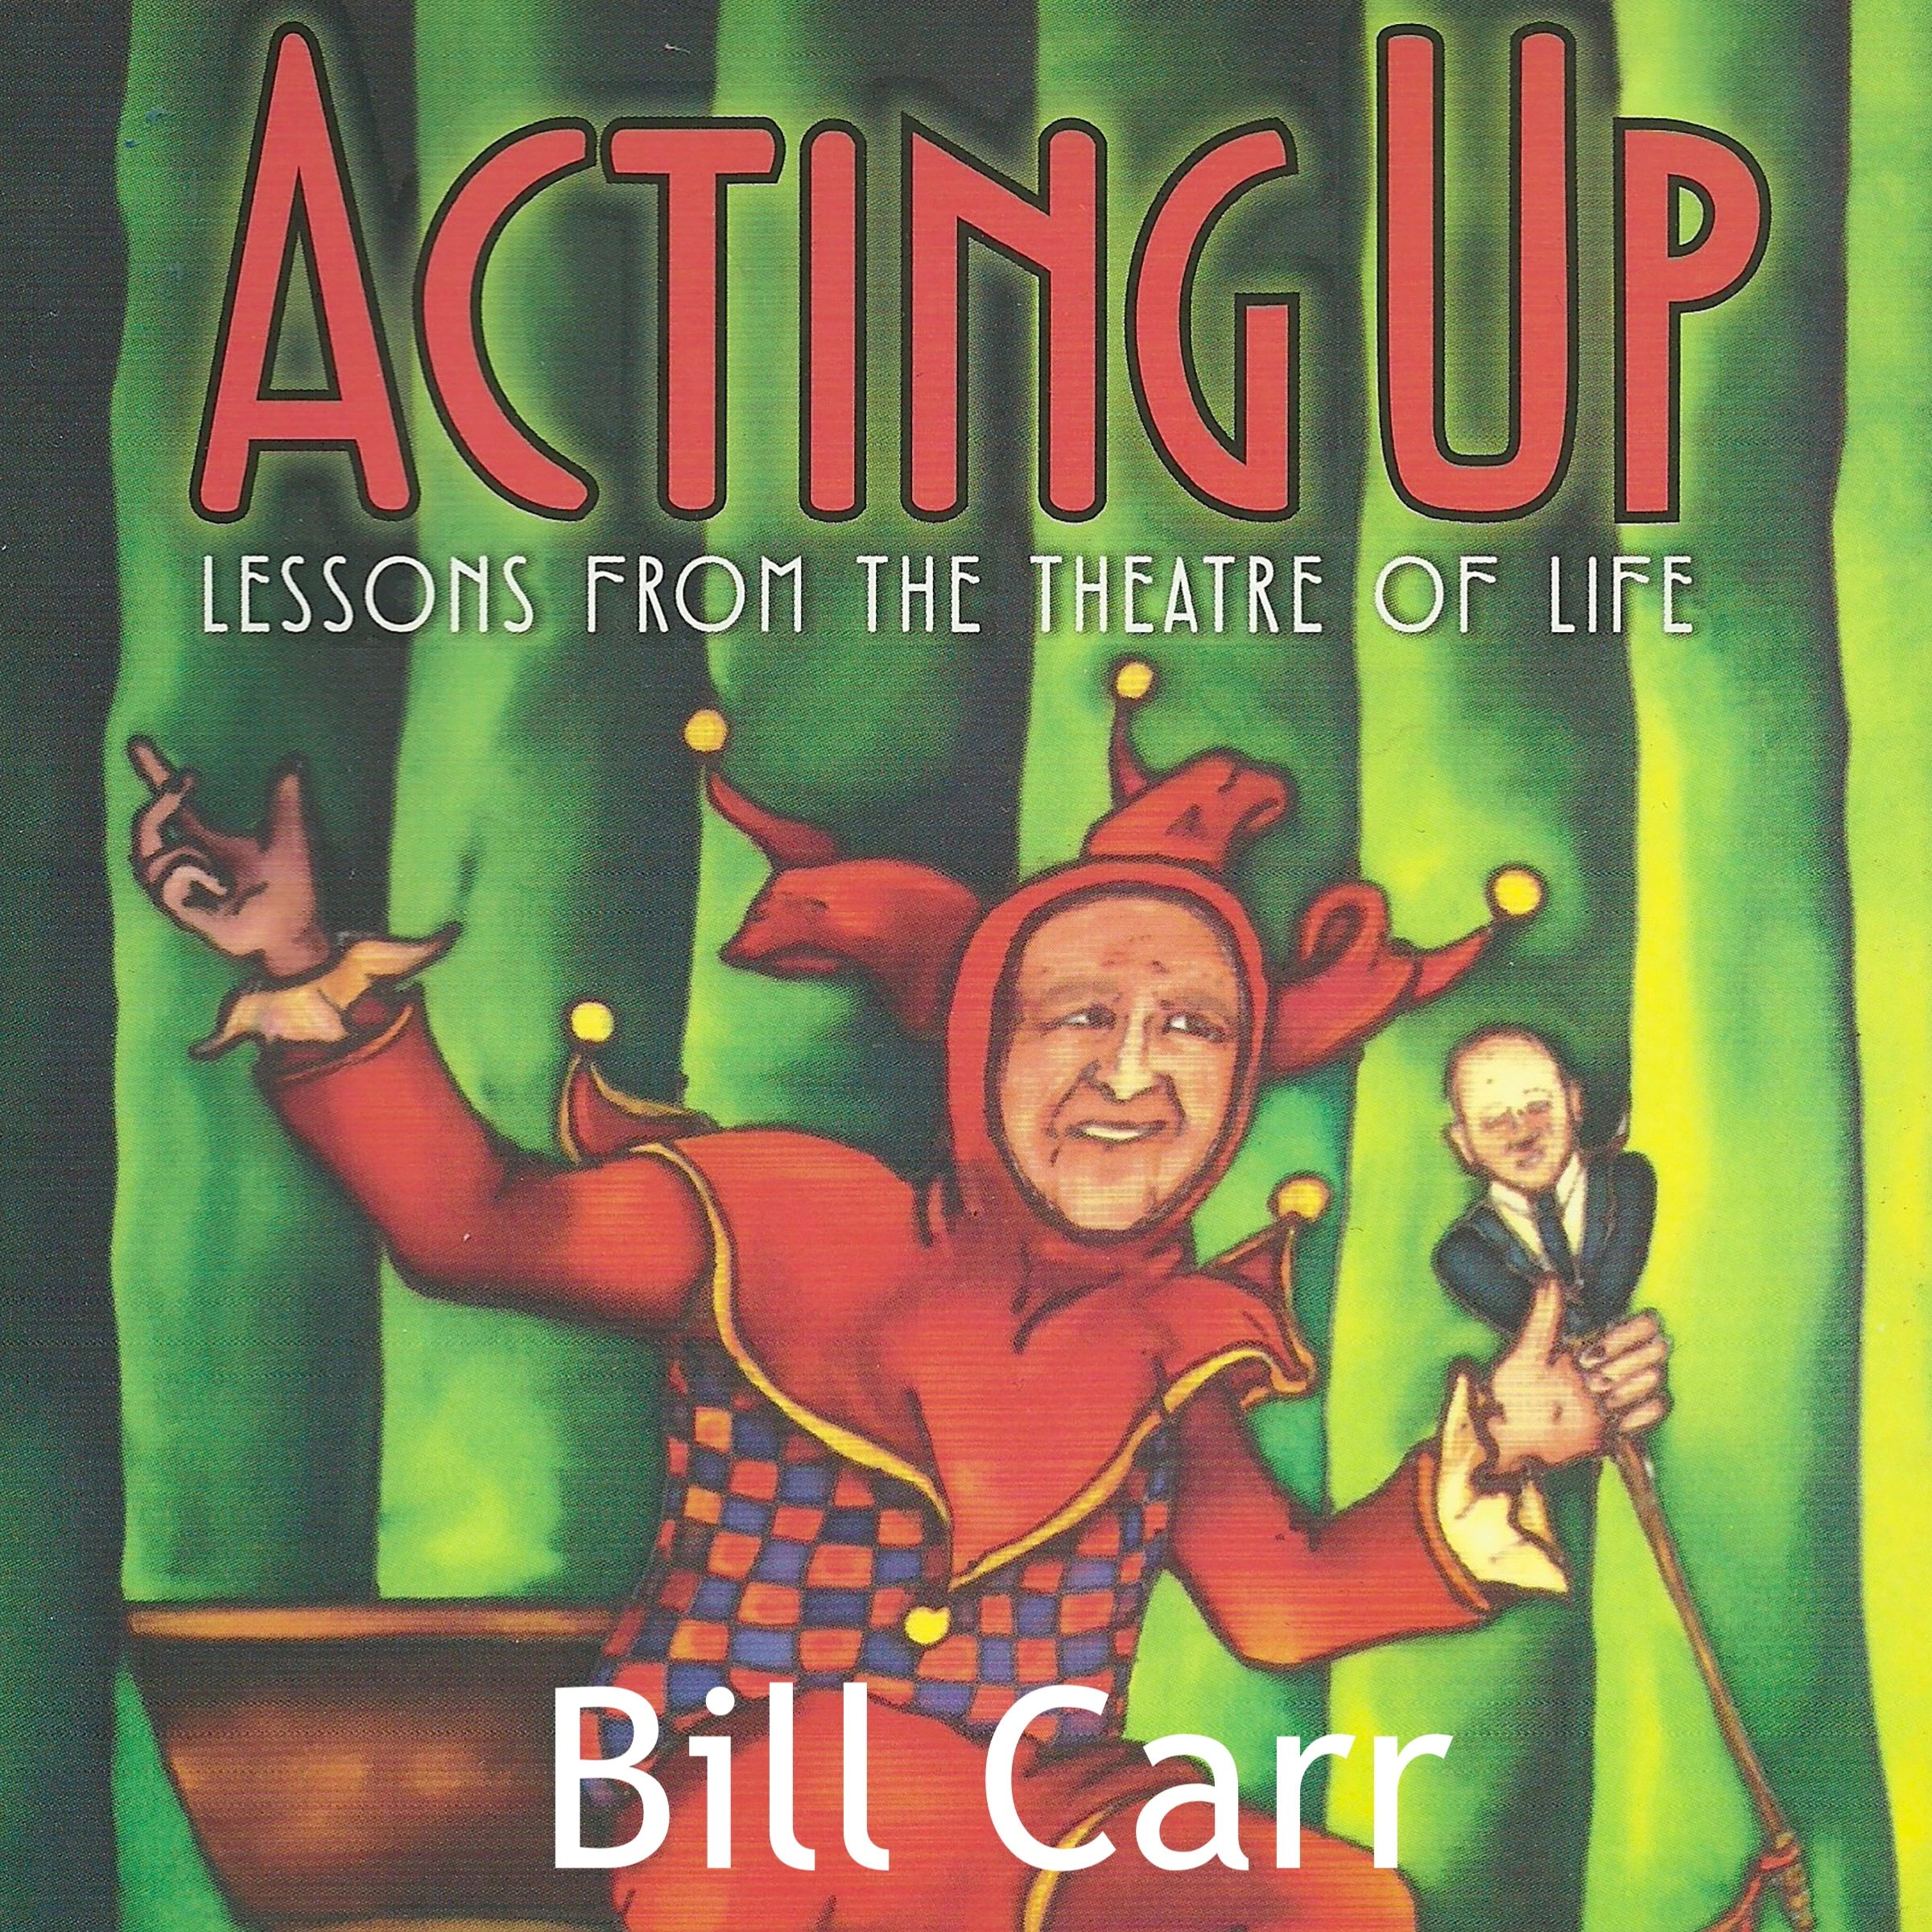 Acting Up: lessons from the theatre of life Audiobook by Bill Carr